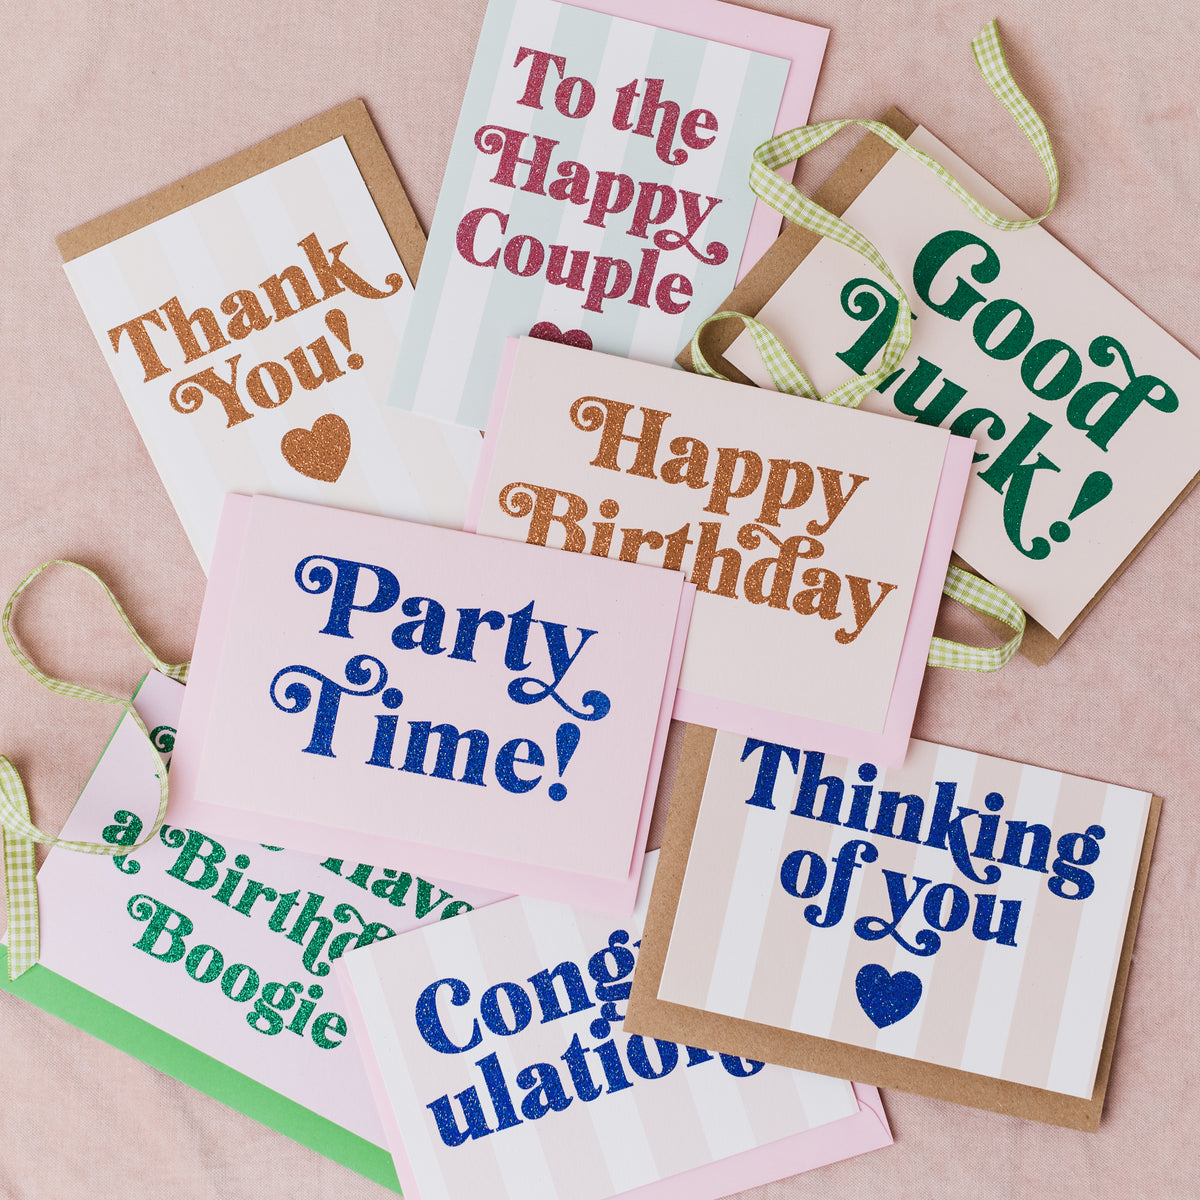 Set of 8 Mixed Glitter Cards